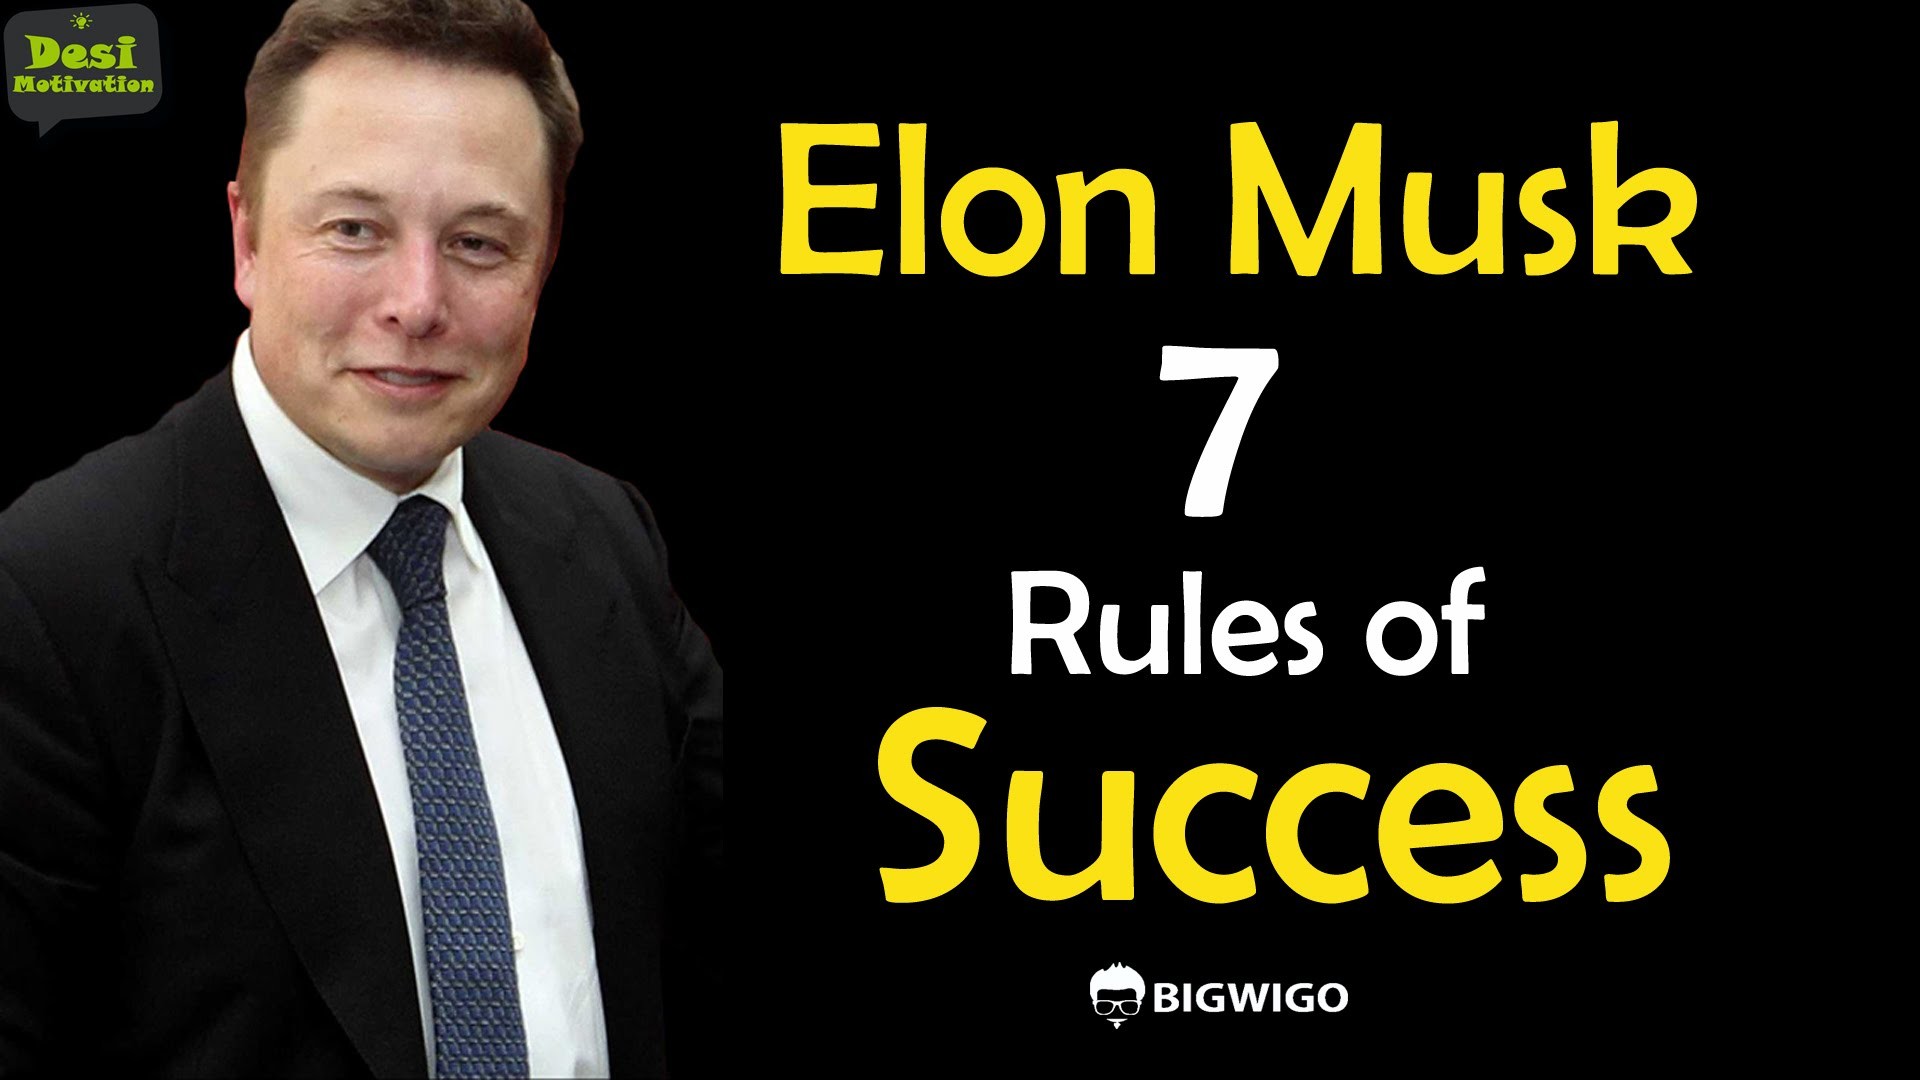 Elon Musk 7 Rules Of Success PayPal Tesla SpaceX Founder Motivational – YouTube